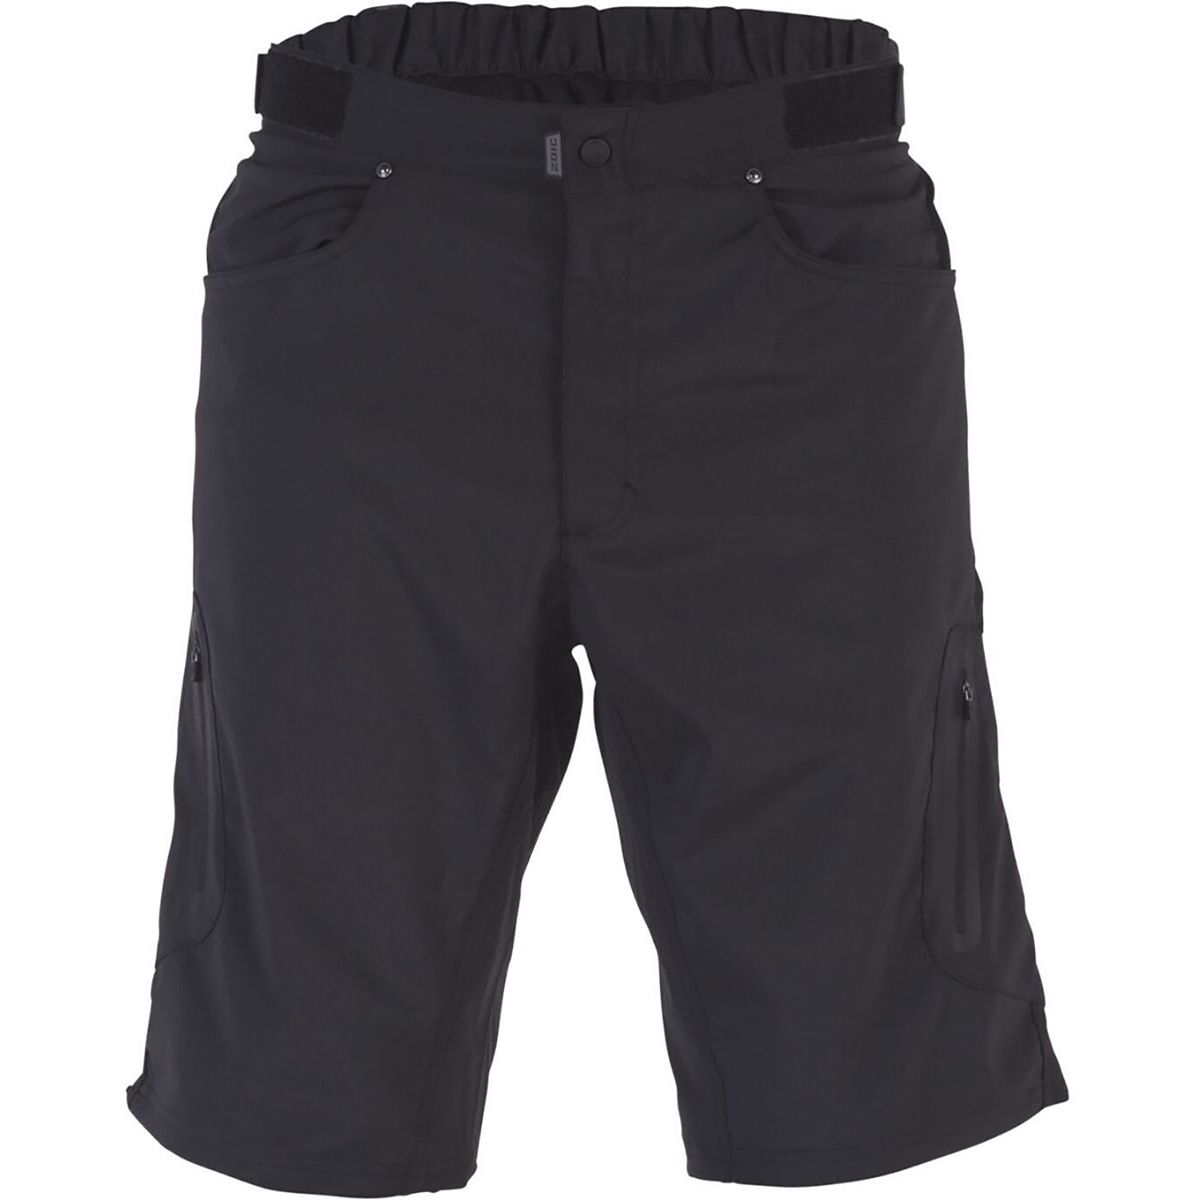 ZOIC Flow Short + Essential Liner - лайнер Zoic